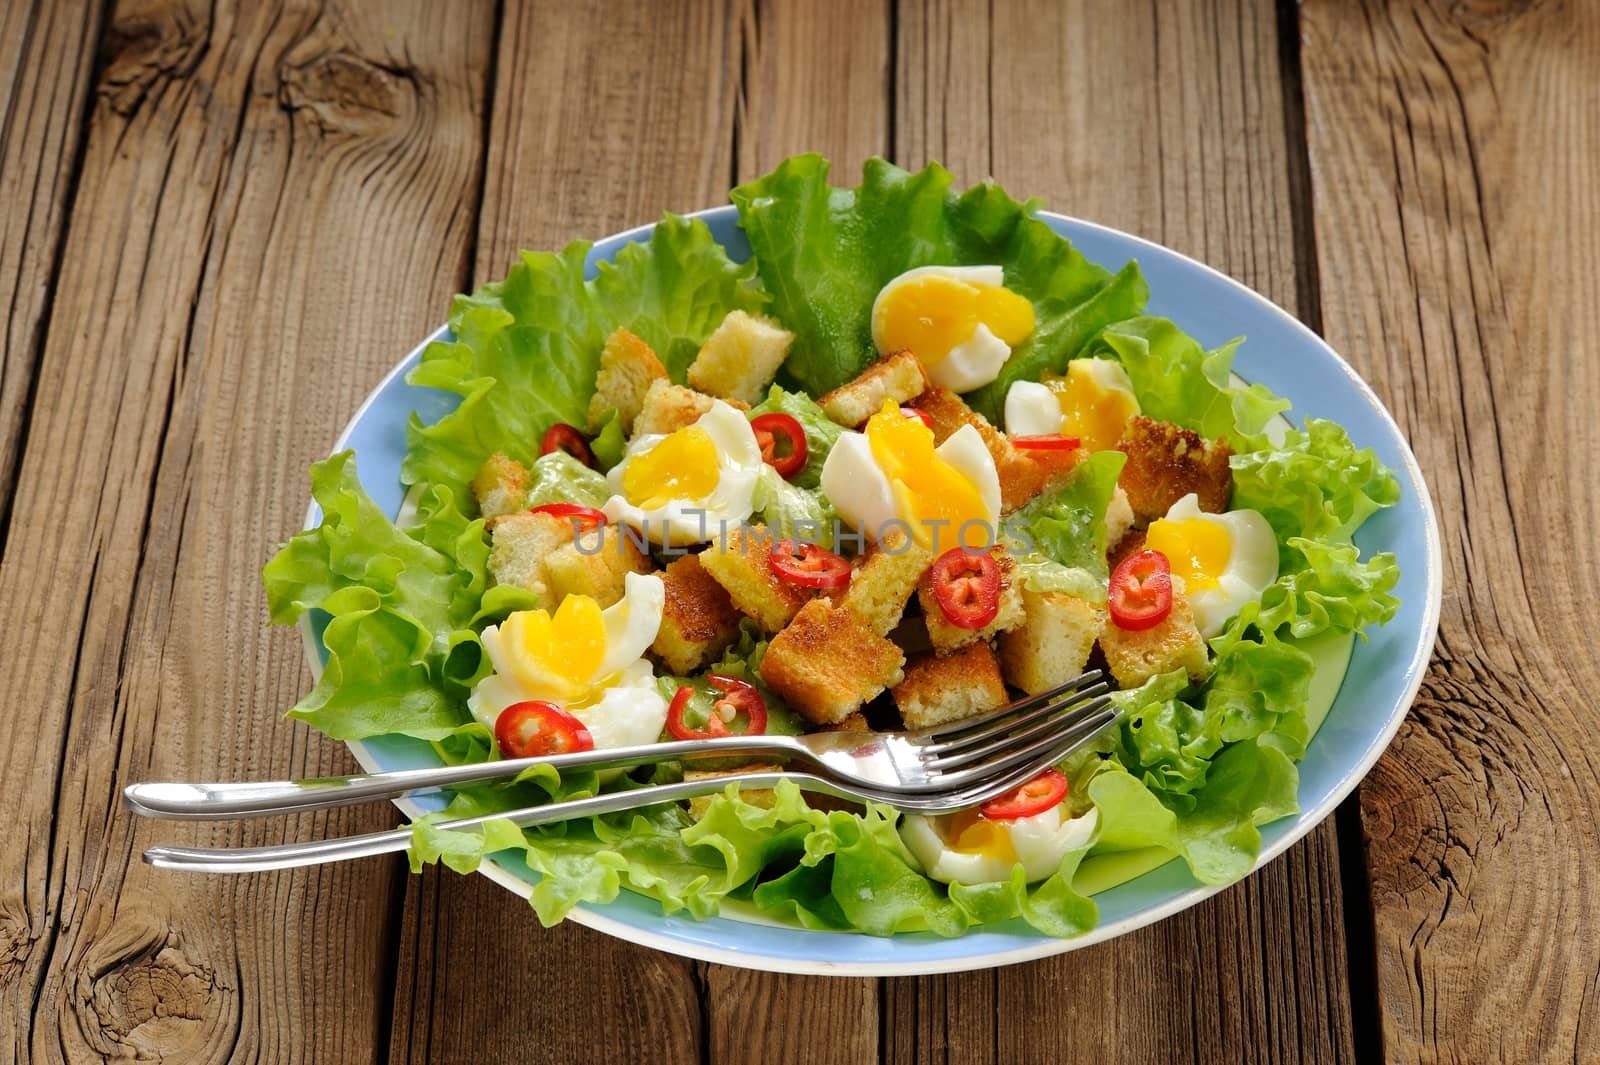 Salad Caesar with eggs, chili pepper and two forks